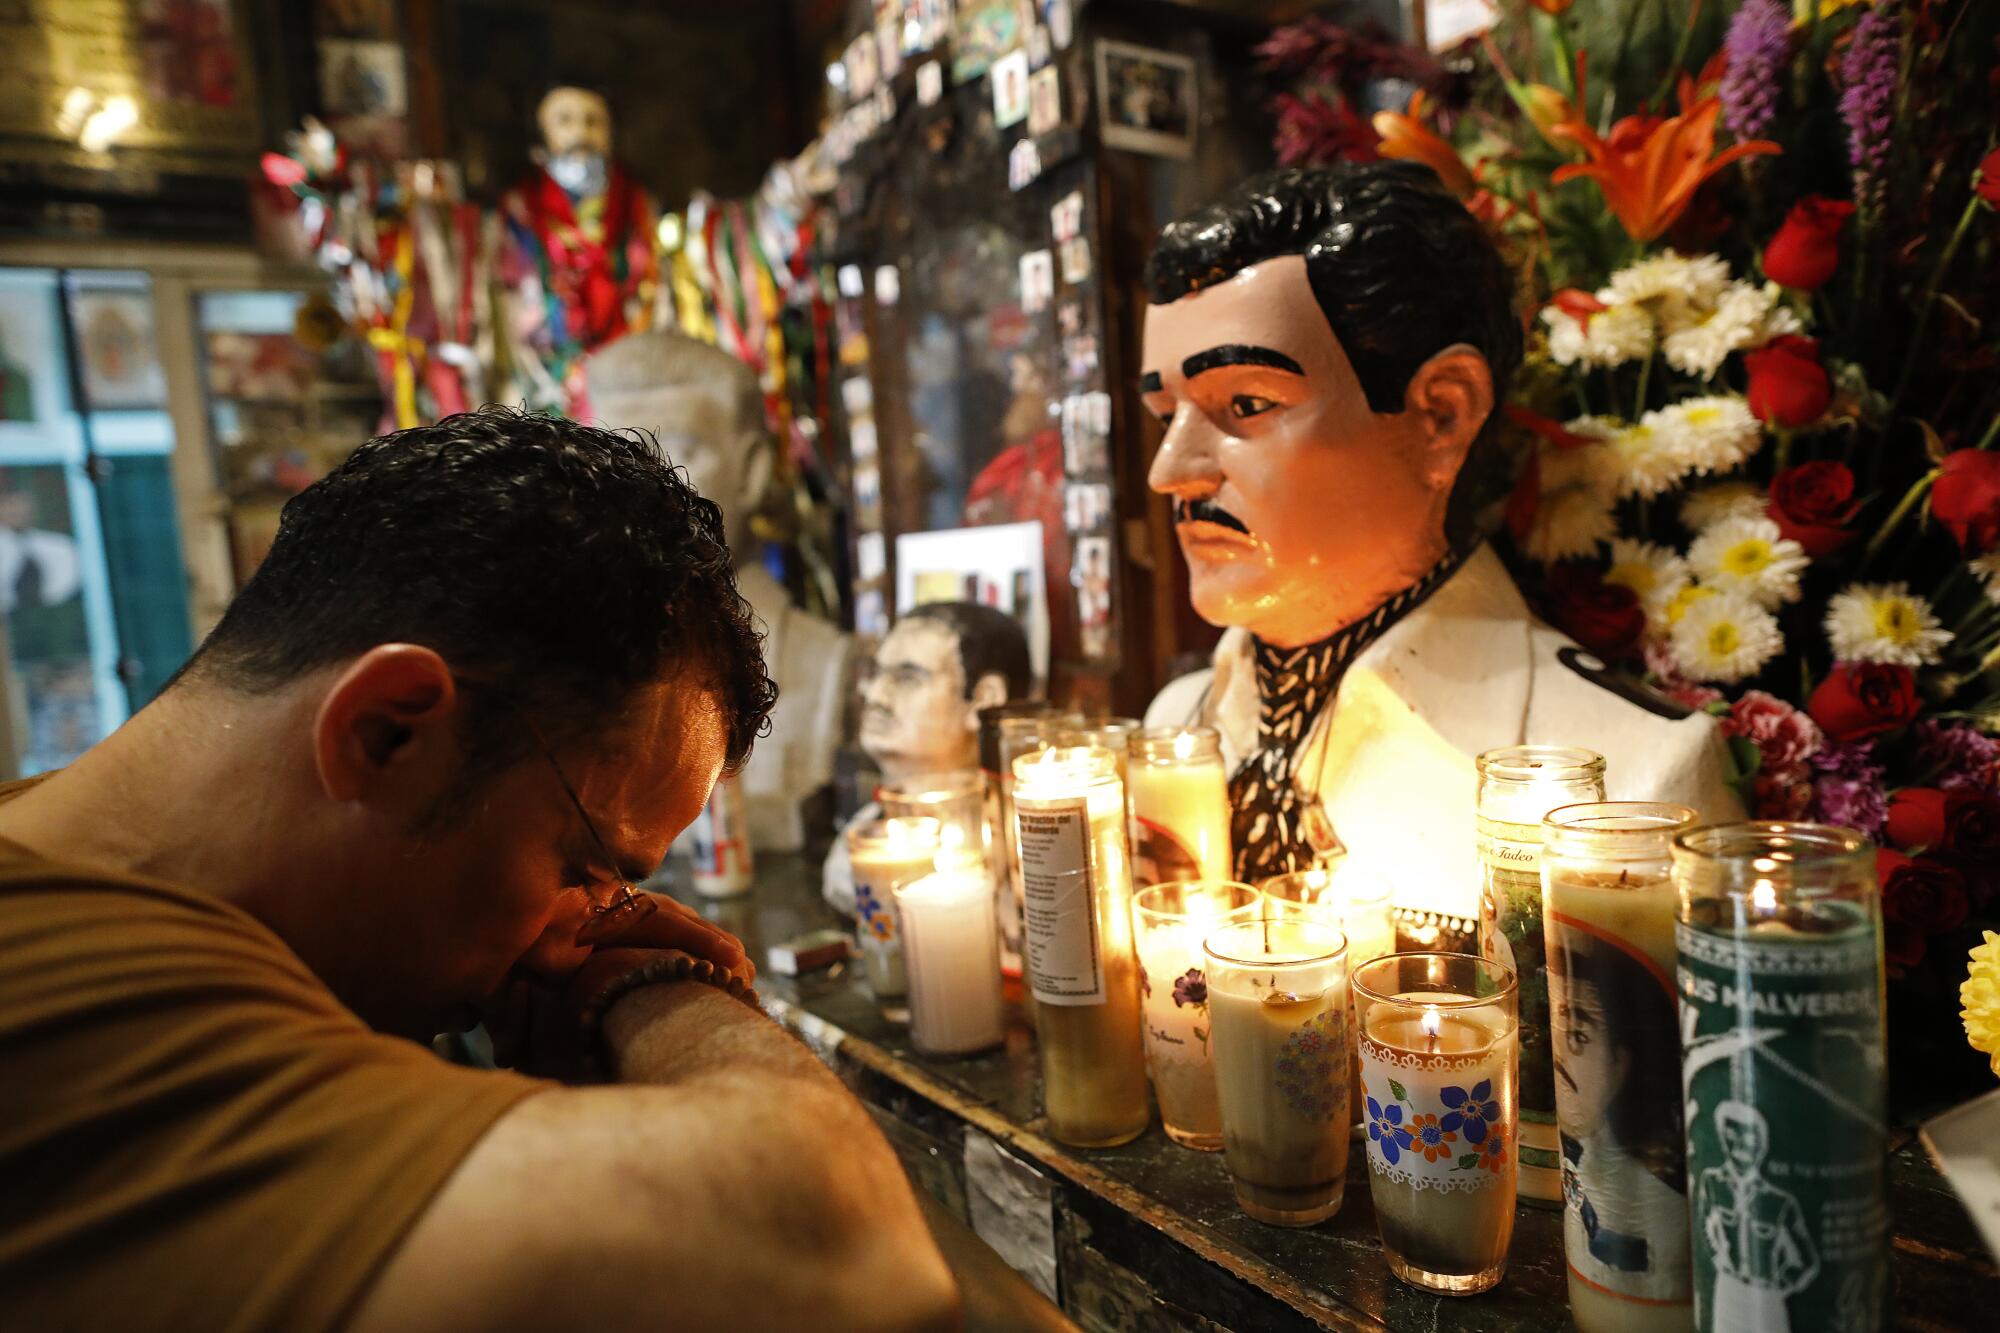 A man bows his head before a bust of Jesus Malverde in a chapel illuminated by candles.